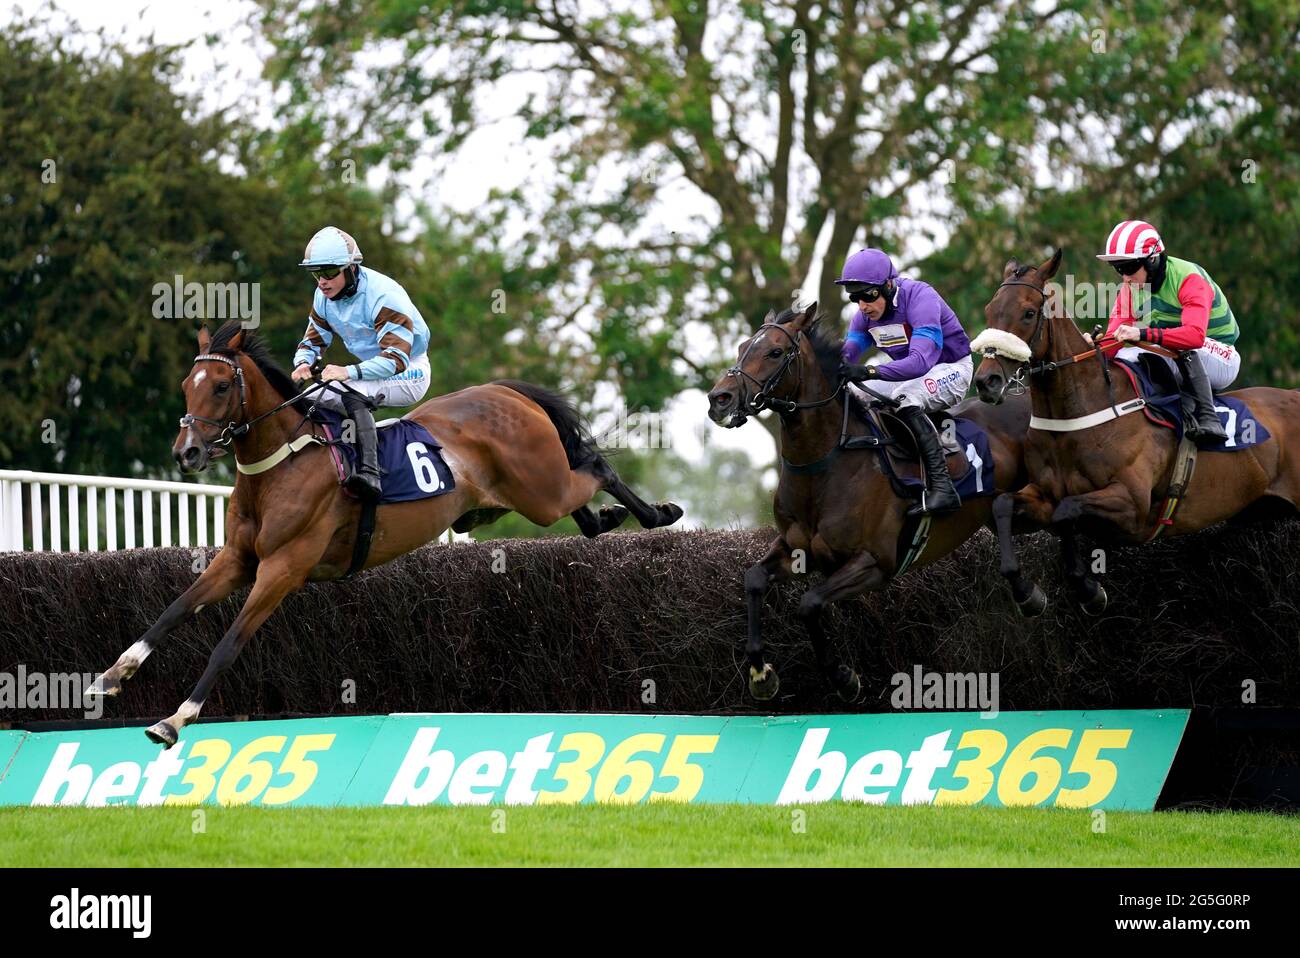 Statuario ridden by James Bowen (left) clears a hurdle whilst competing in the bet365 Handicap Chase at Uttoxeter Racecourse. Sunday June 27, 2021. Stock Photo